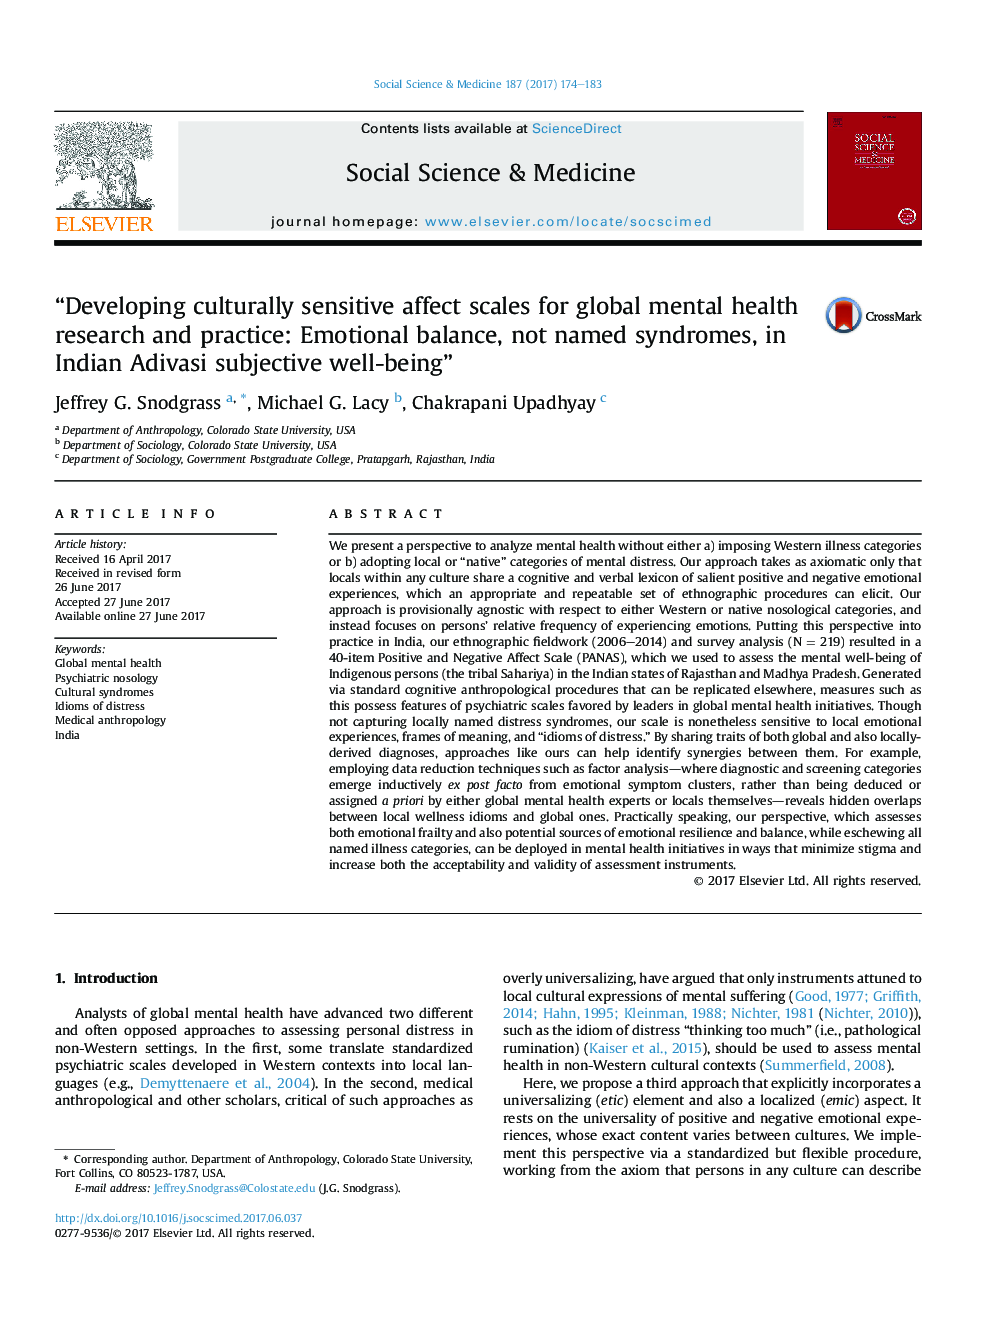 “Developing culturally sensitive affect scales for global mental health research and practice: Emotional balance, not named syndromes, in Indian Adivasi subjective well-being”